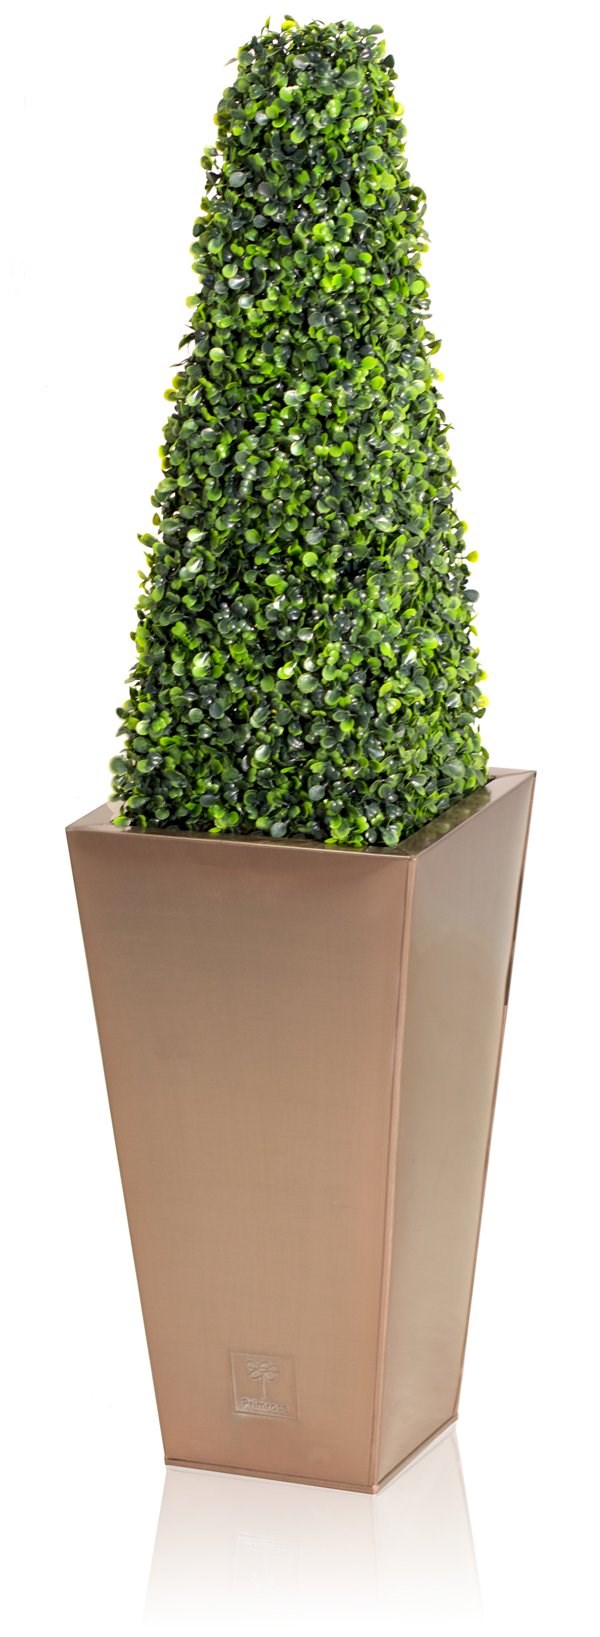 1x 90cm Artificial Topiary Tree by Primrose™ - 'The Big Buxus Obelisk'